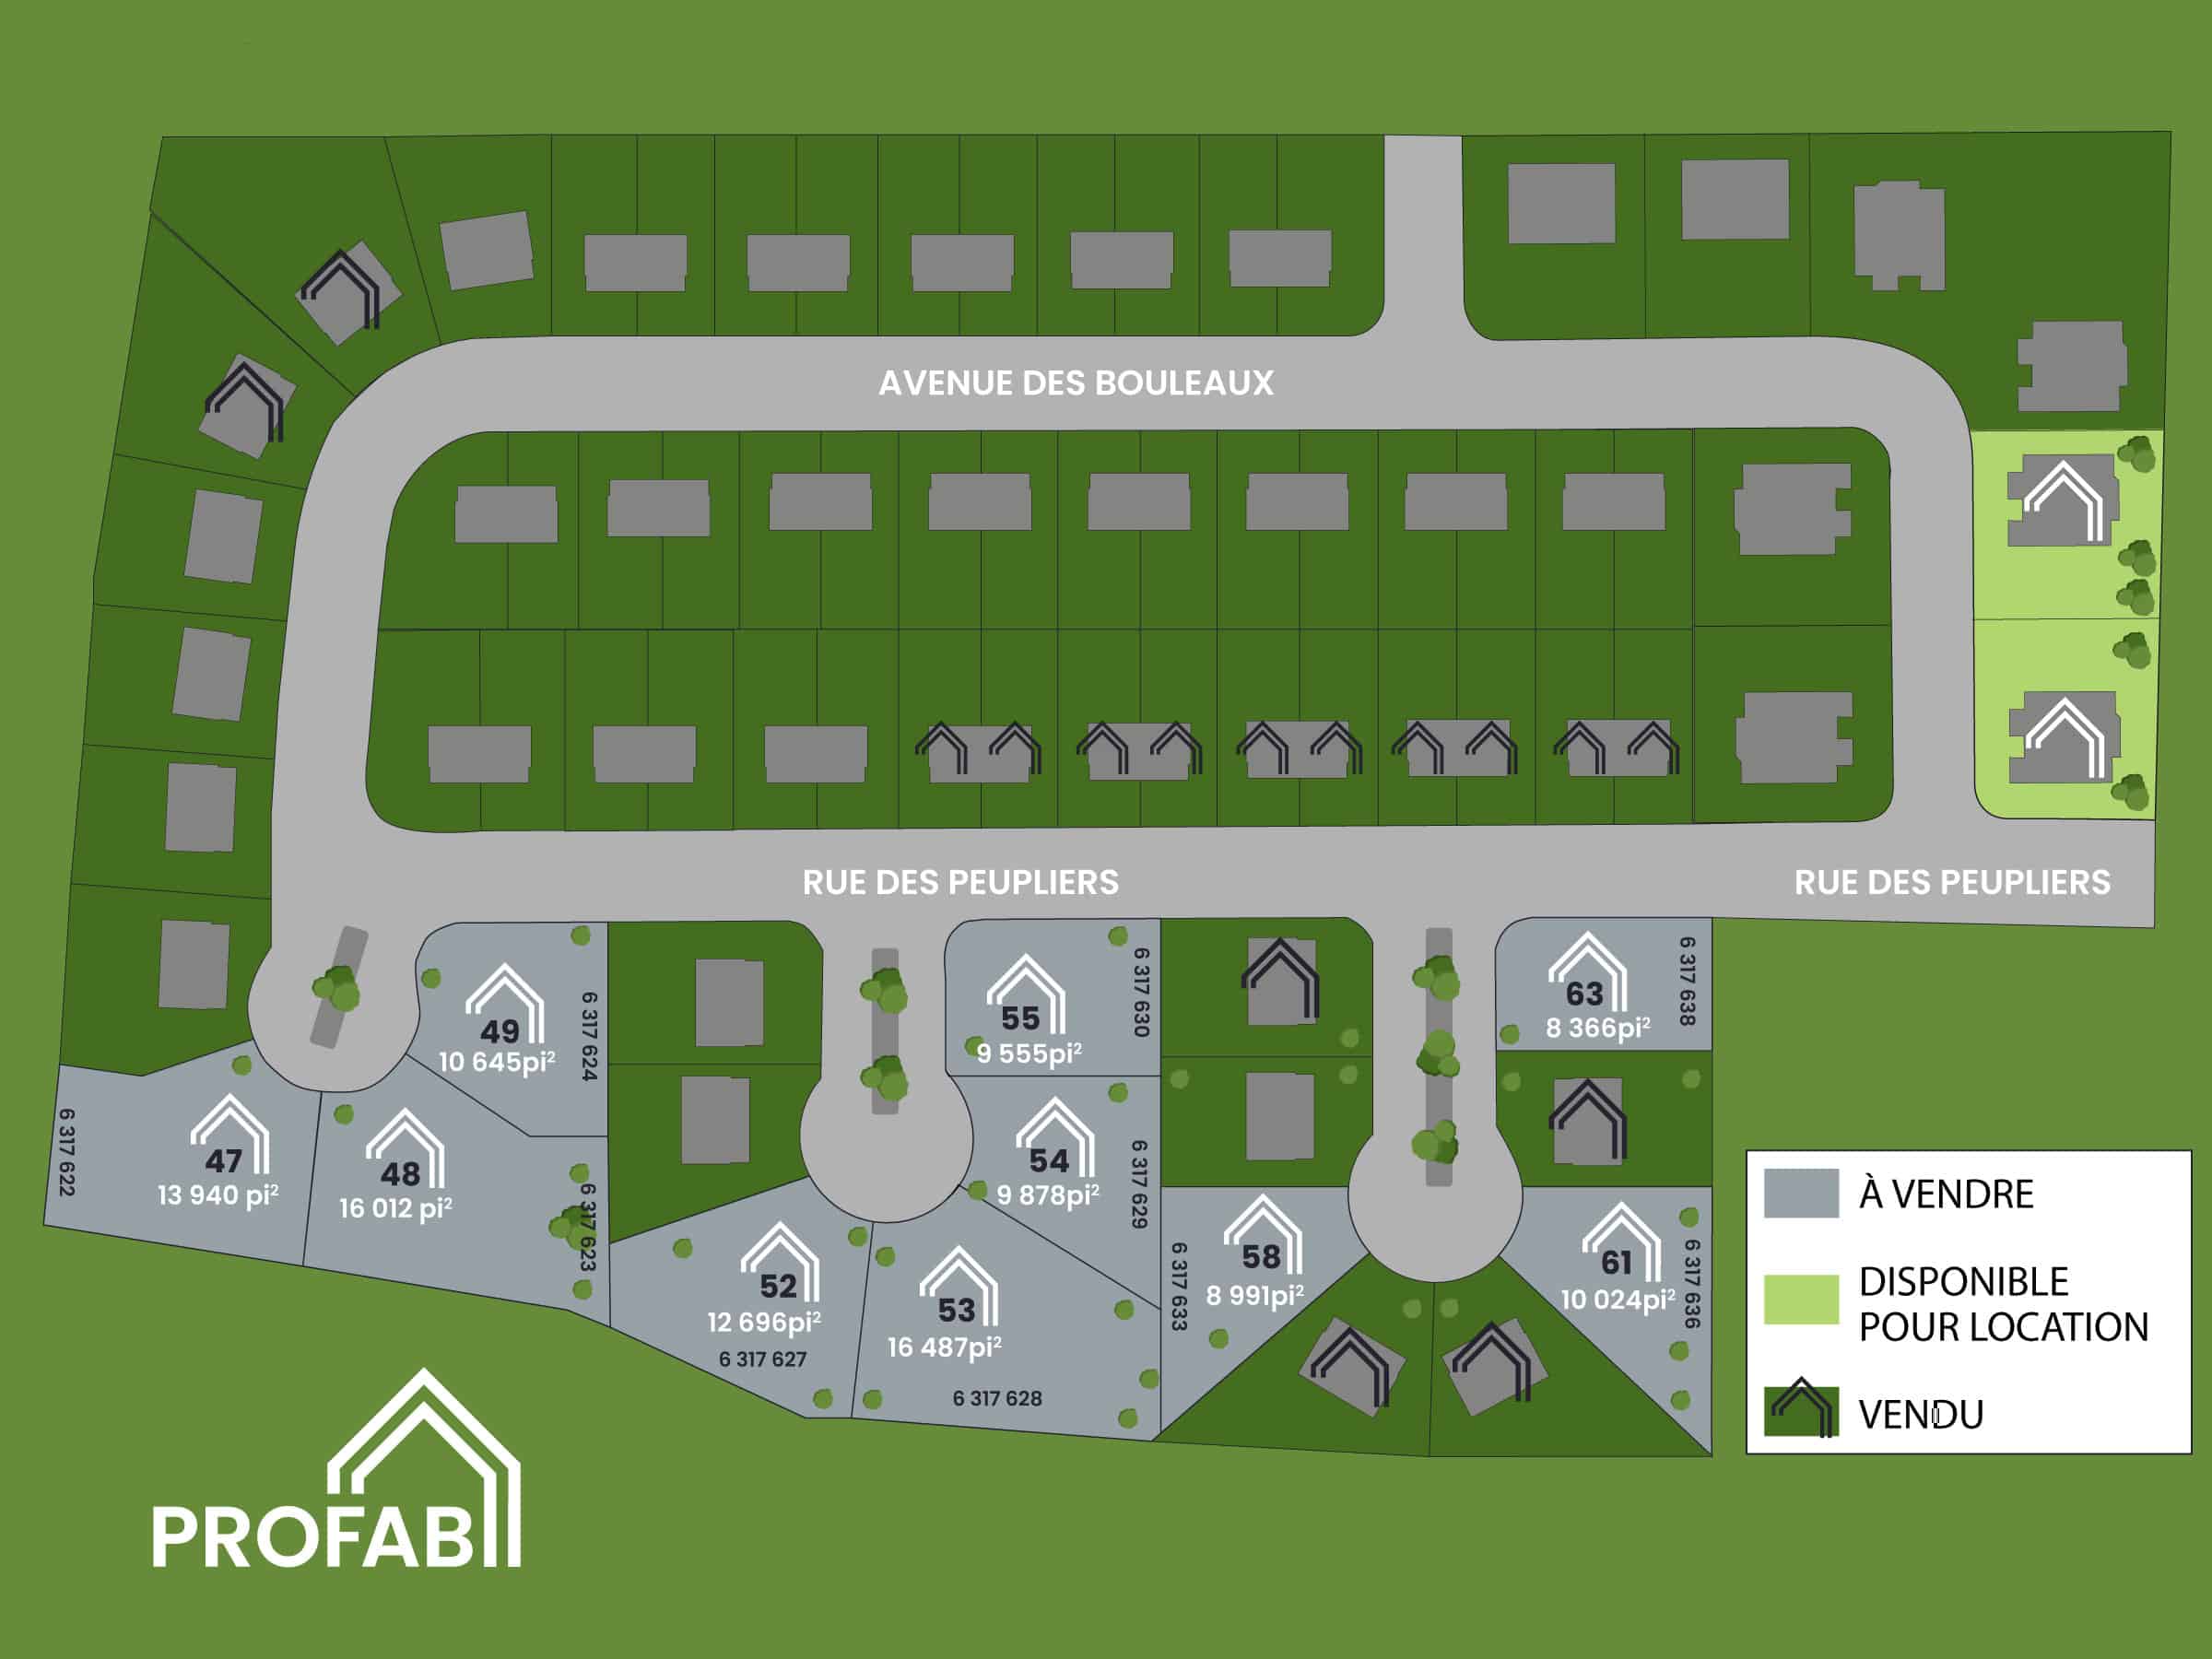 2D plan at Vallée jonction. Vacant lot number 49 for sale.